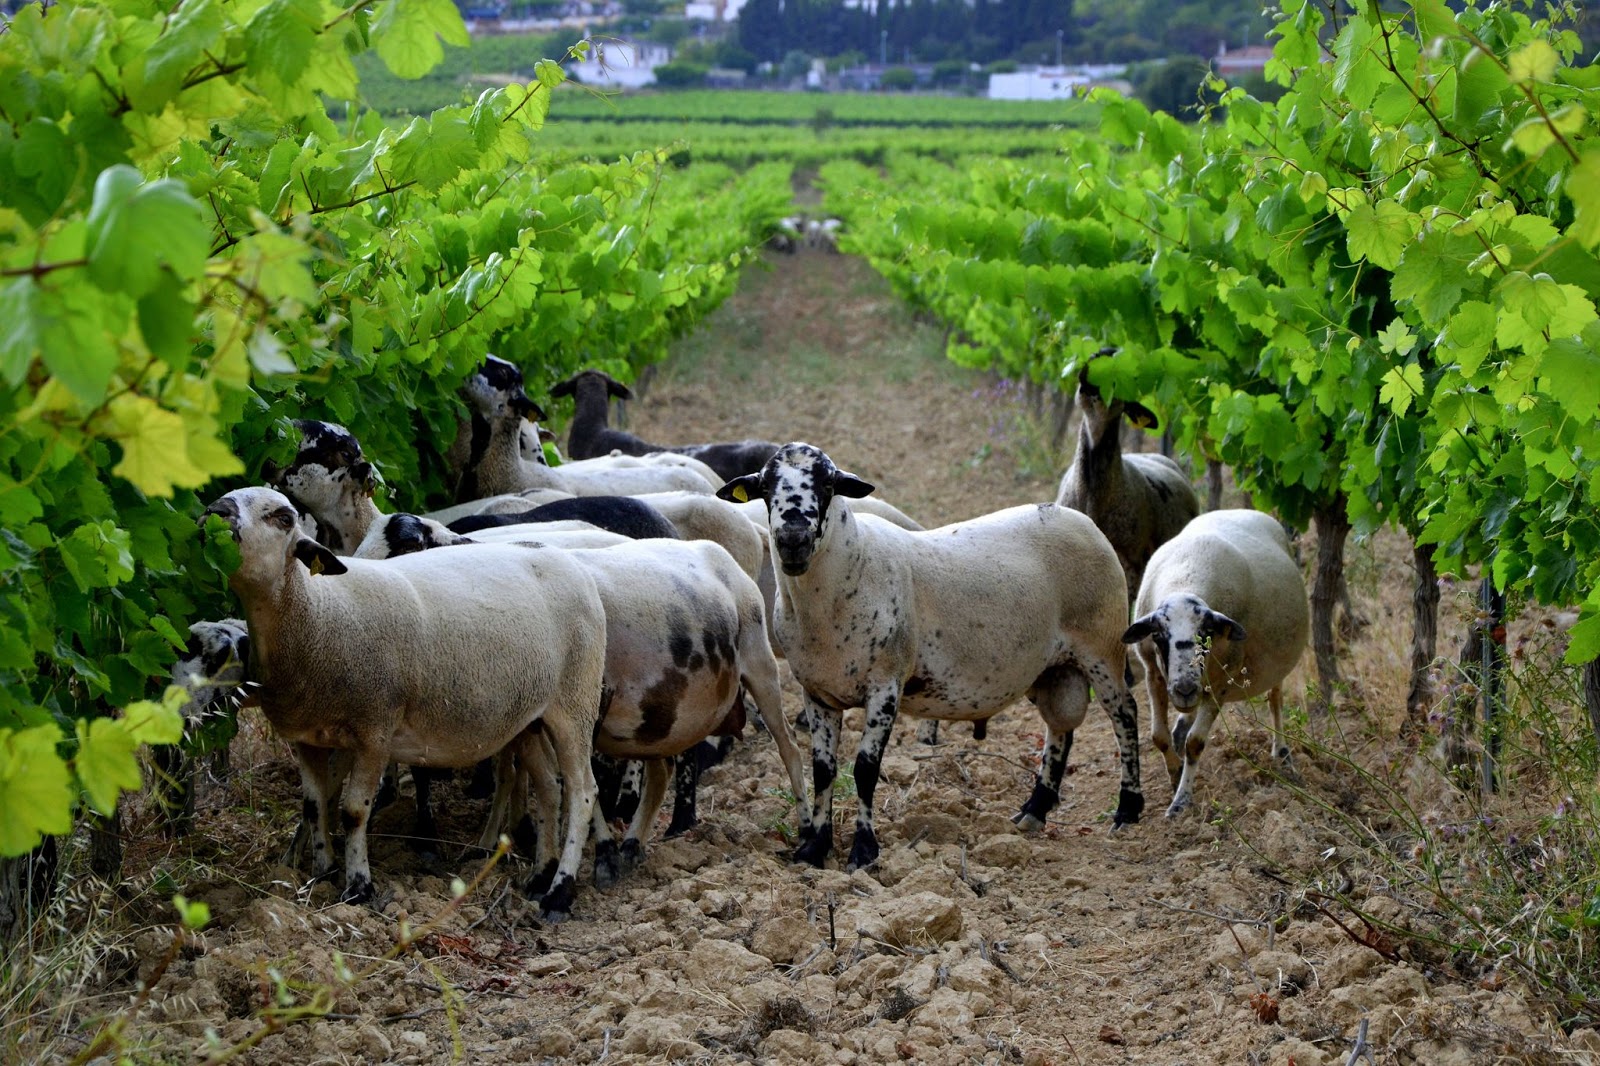 Spanish Farmers Fight Forest Fires With Agroforestry (and Many Sheep)